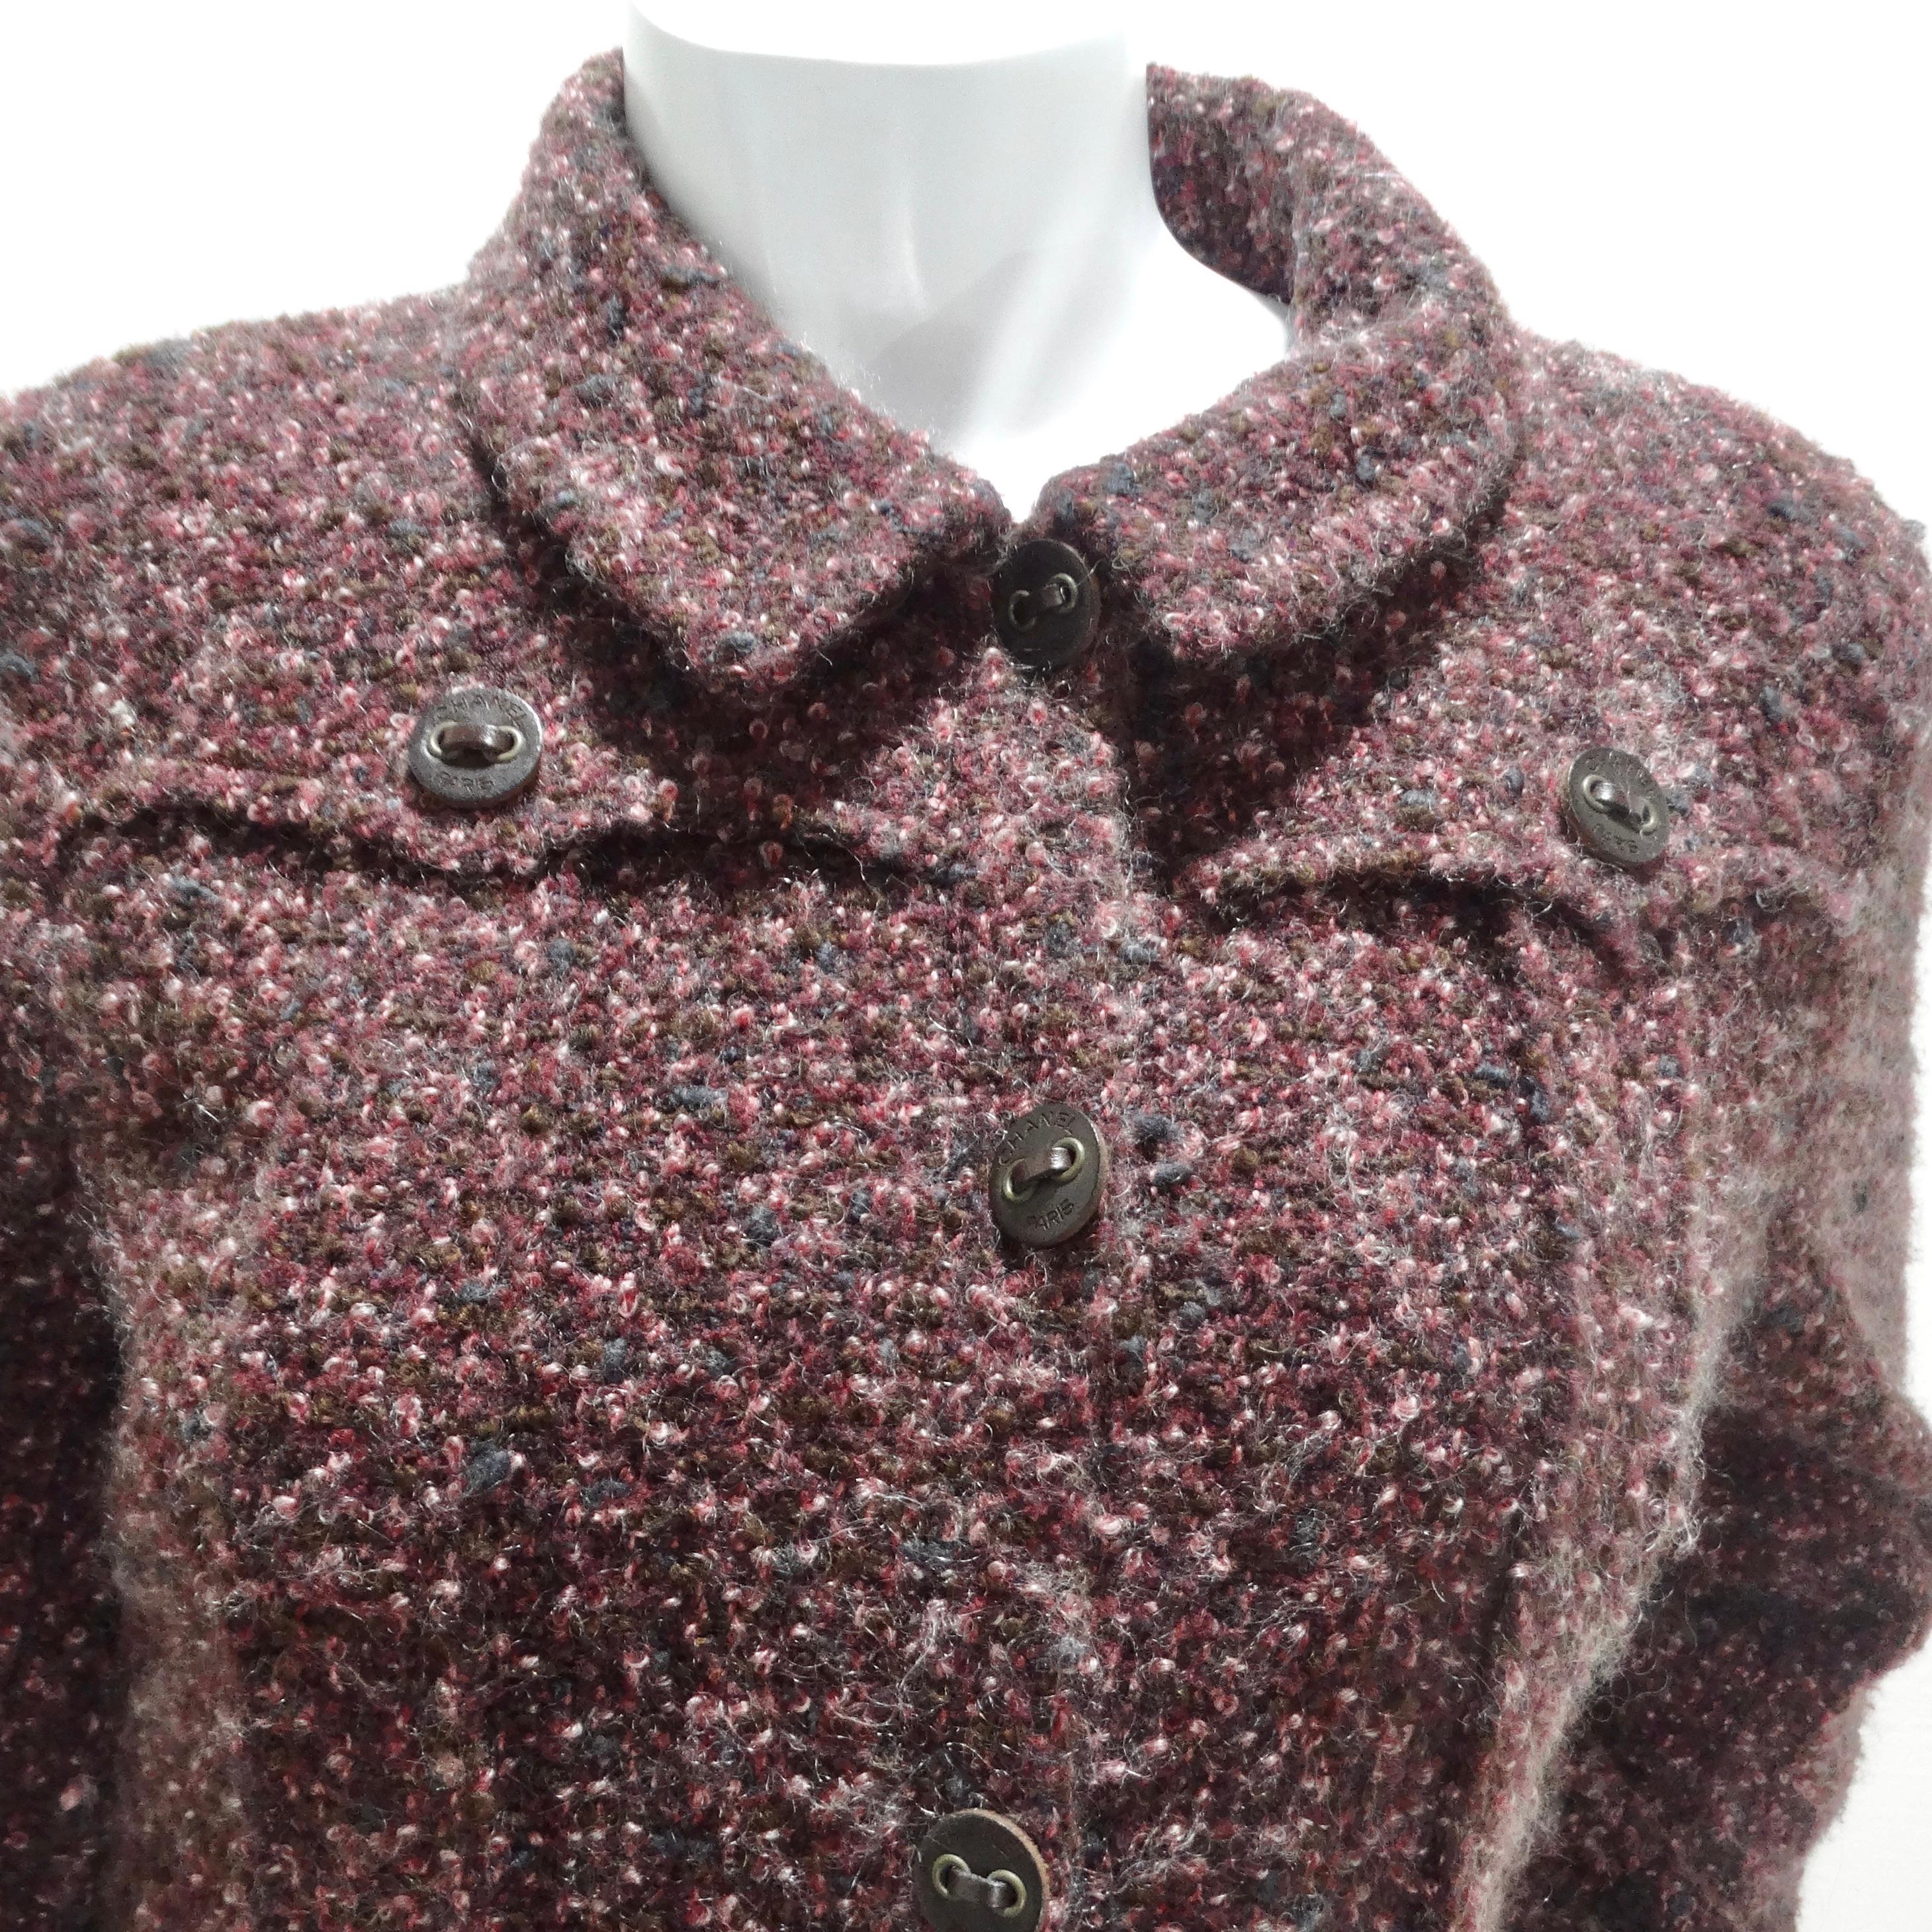 Do not miss out on a blazer dress that embodies the essence of Chanel's timeless style - the Chanel 2002 Burgundy Wool Tweed Blazer Dress. This dark burgundy/brown wool mohair tweed blazer features a classic collar, a series of brown Chanel logo